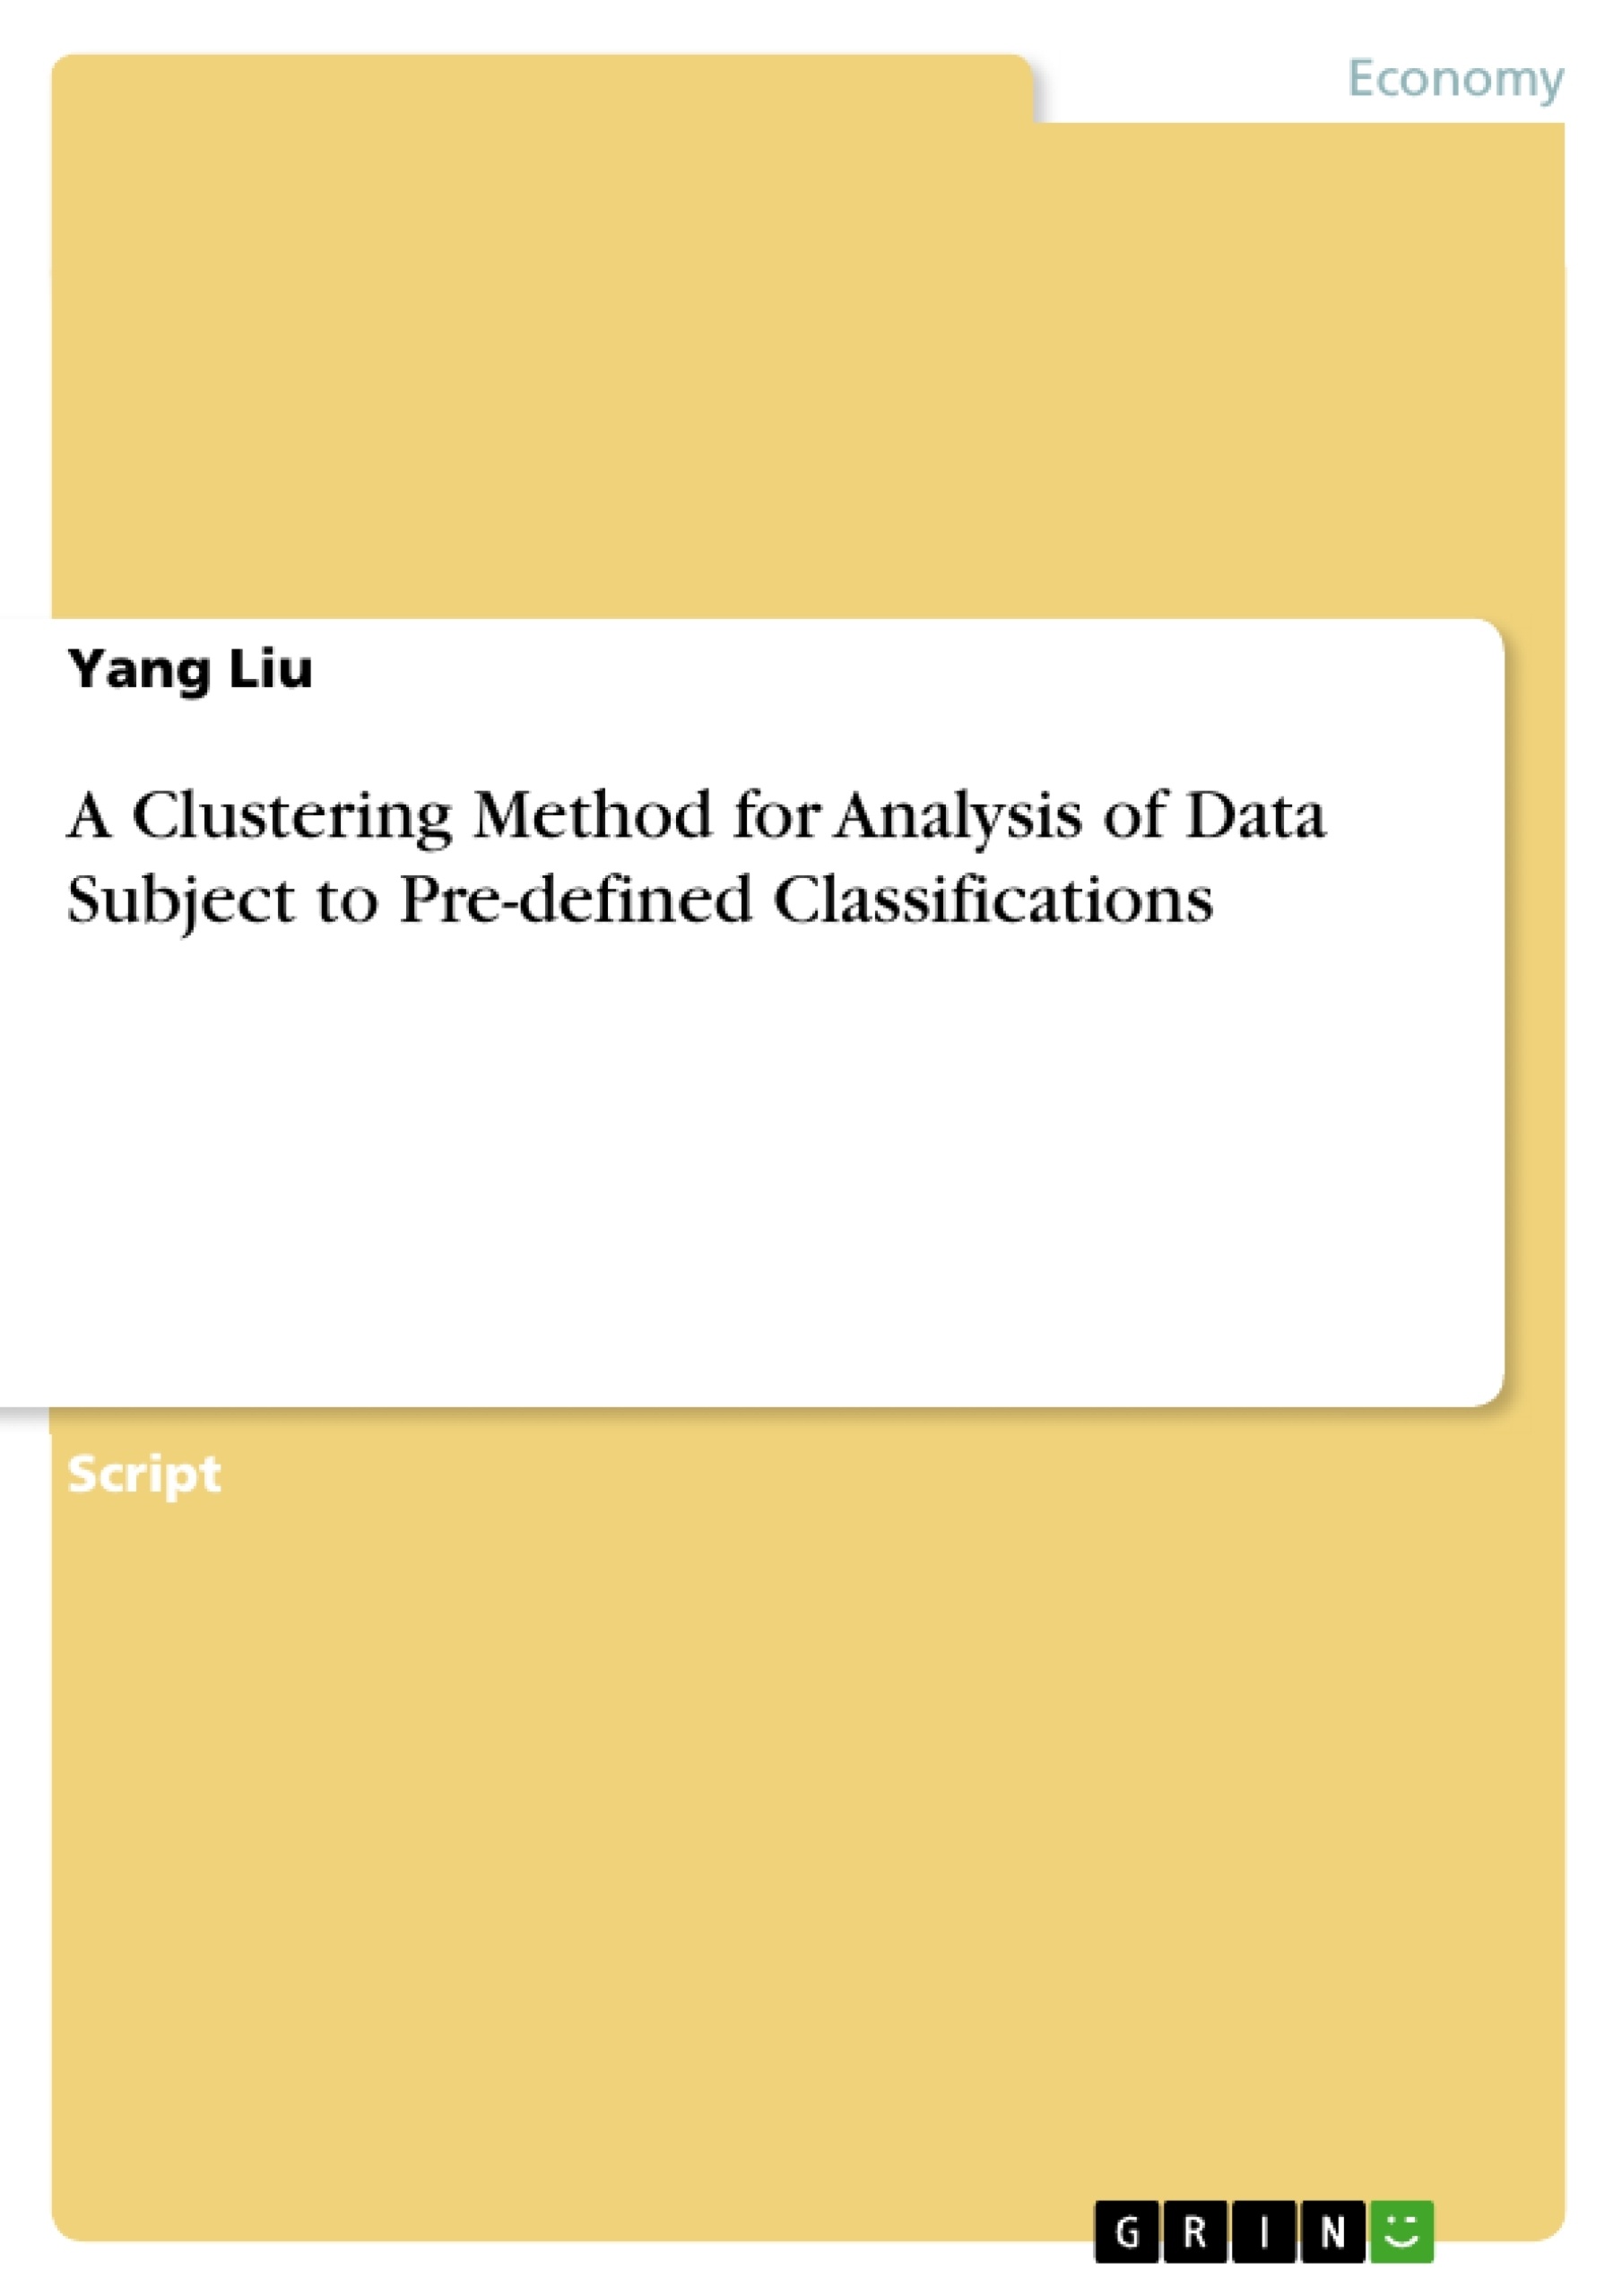 Title: A Clustering Method for Analysis of Data Subject to Pre-defined Classifications